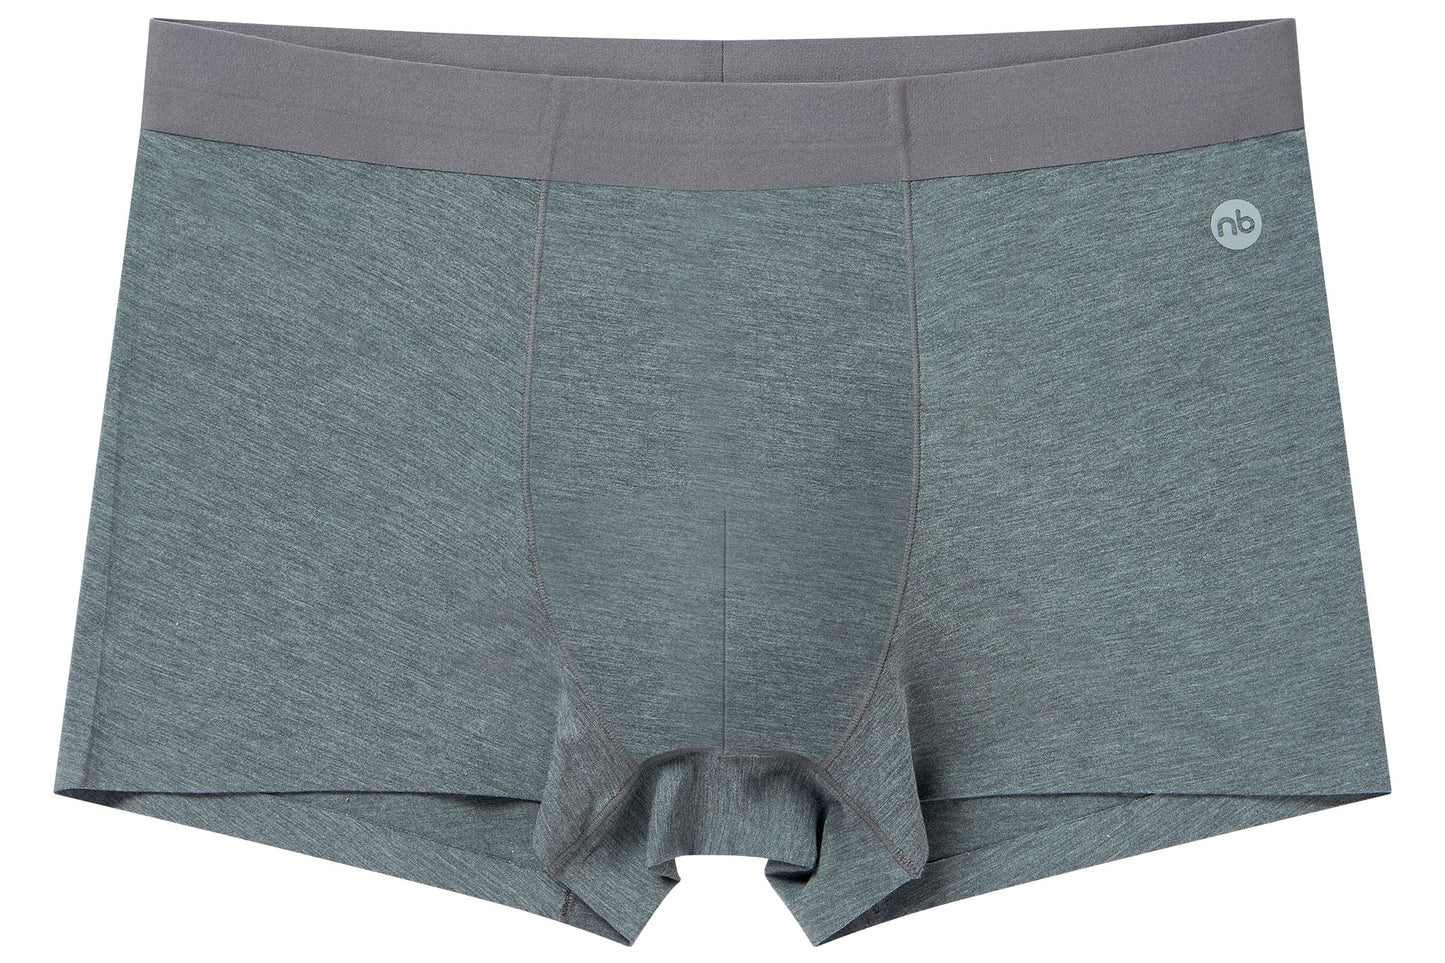 Men's Basics Boxer Briefs (Bamboo Spandex, 2 Pack) - Charcoal And Grey Dusk